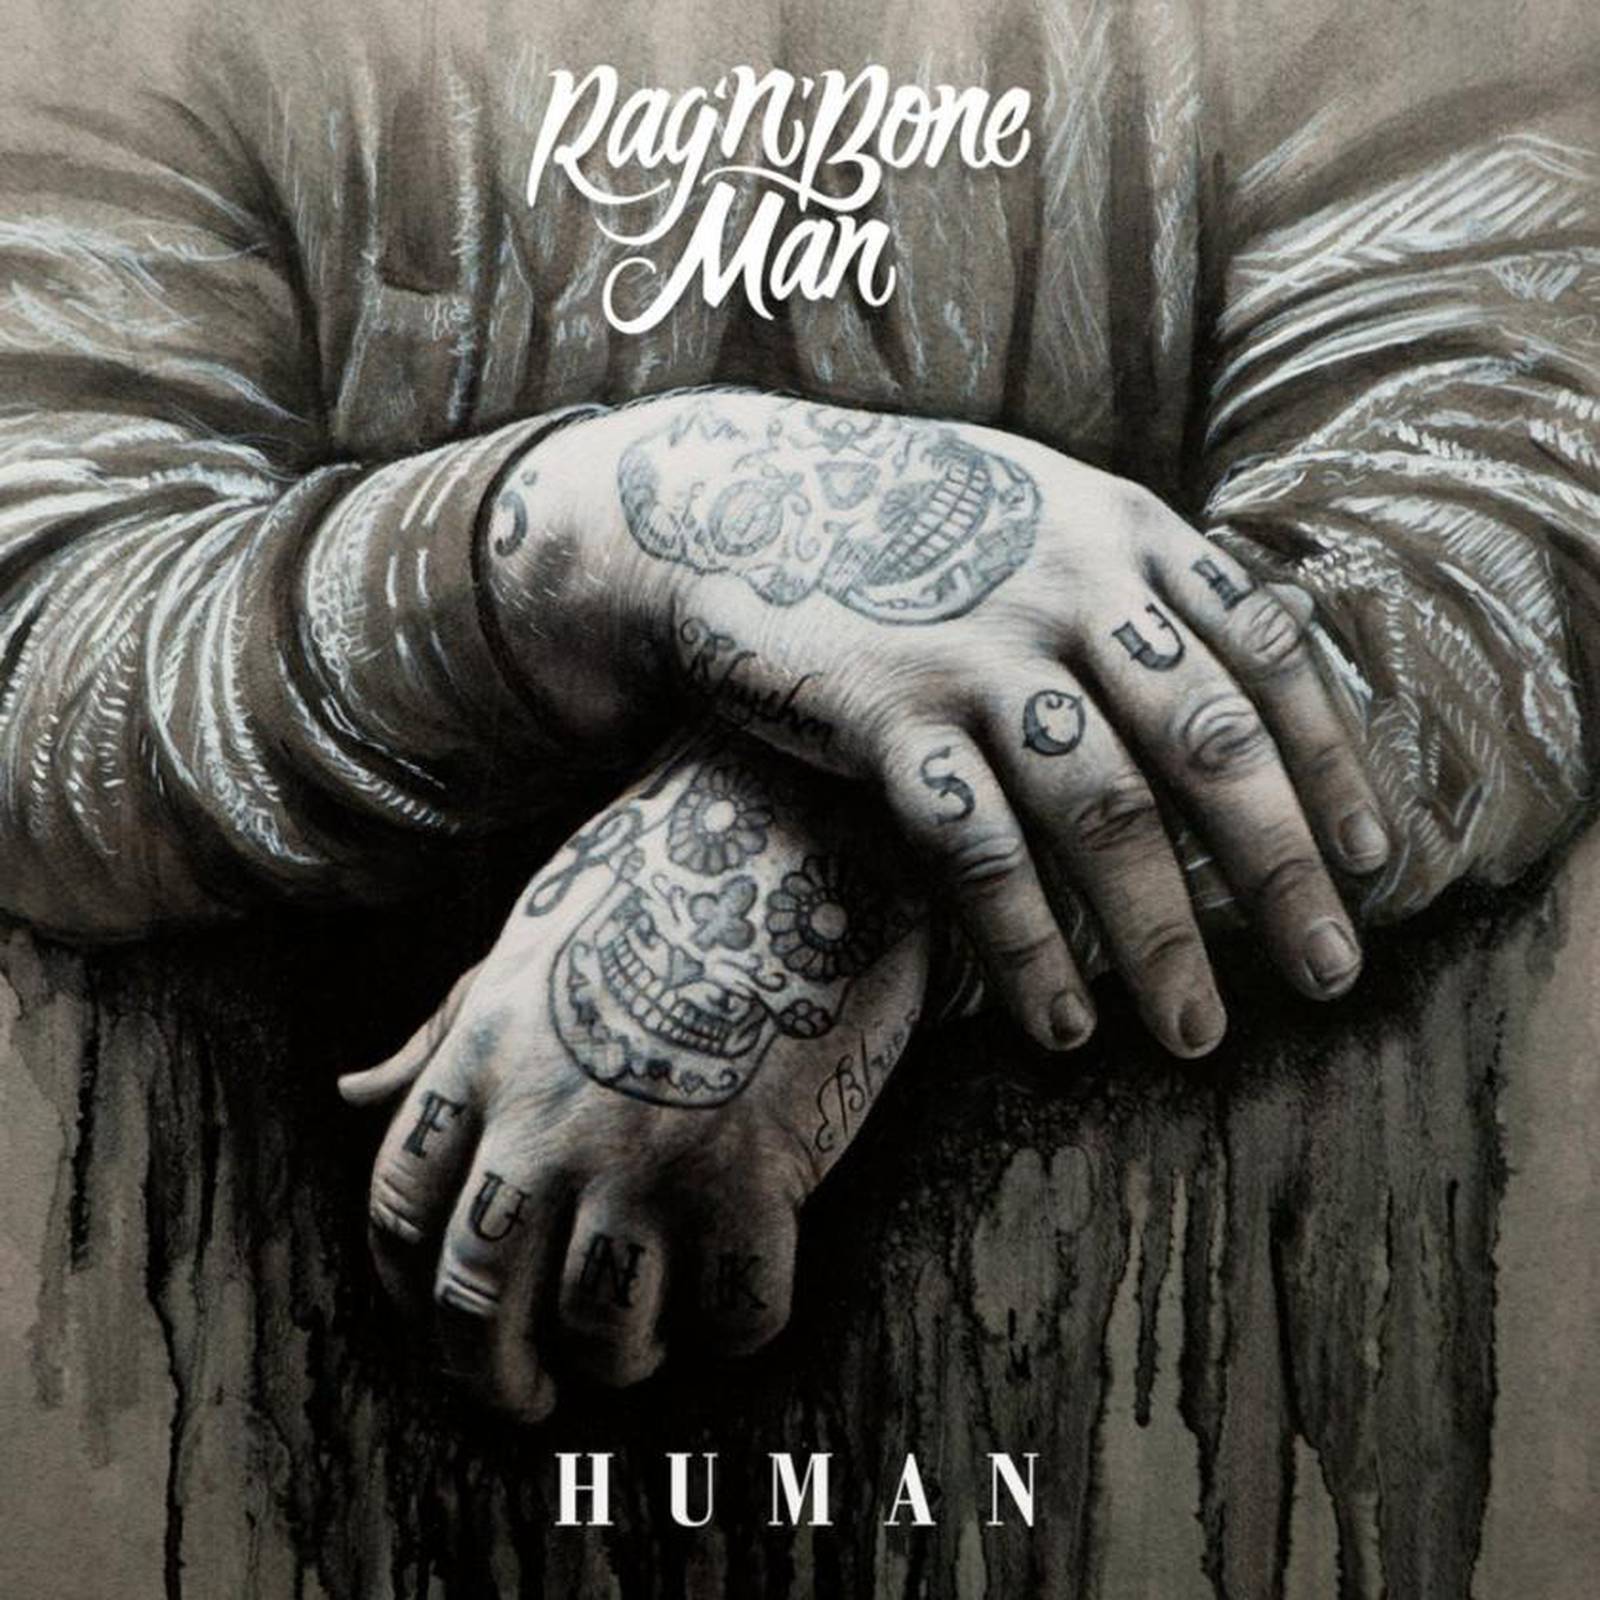 Rag'n'Bone Man – Human album review: ardent rap and sweet-spot blues in a  showstopping voice – The Irish Times